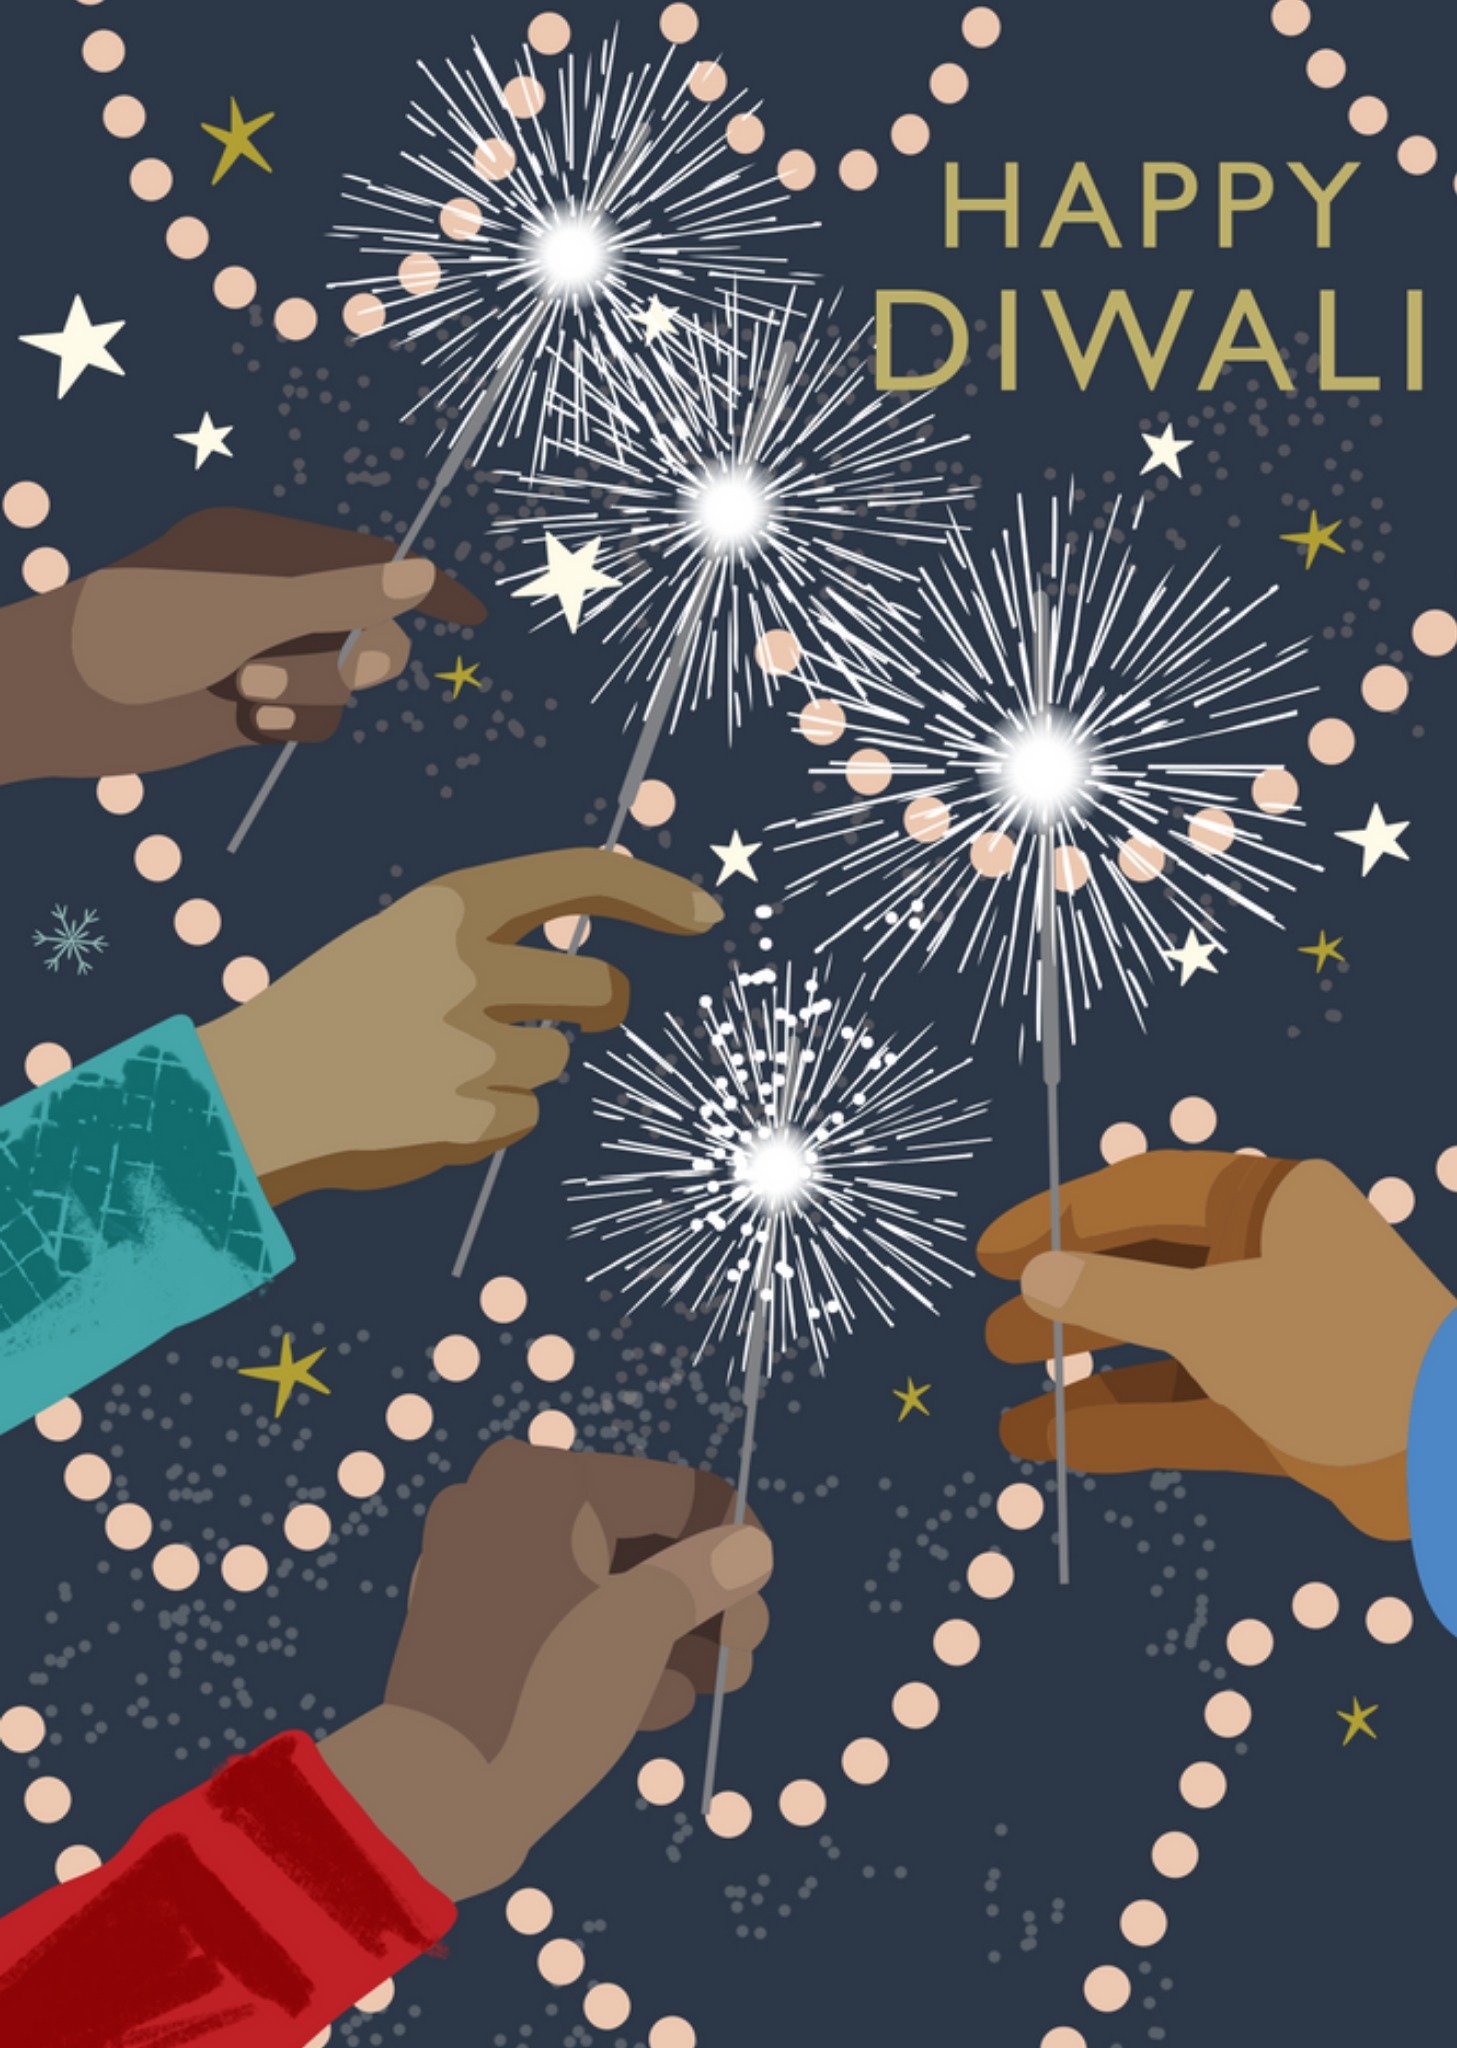 Moonpig Cheerful Illustrated Hands Holding Sparklers Happy Diwali Card, Large